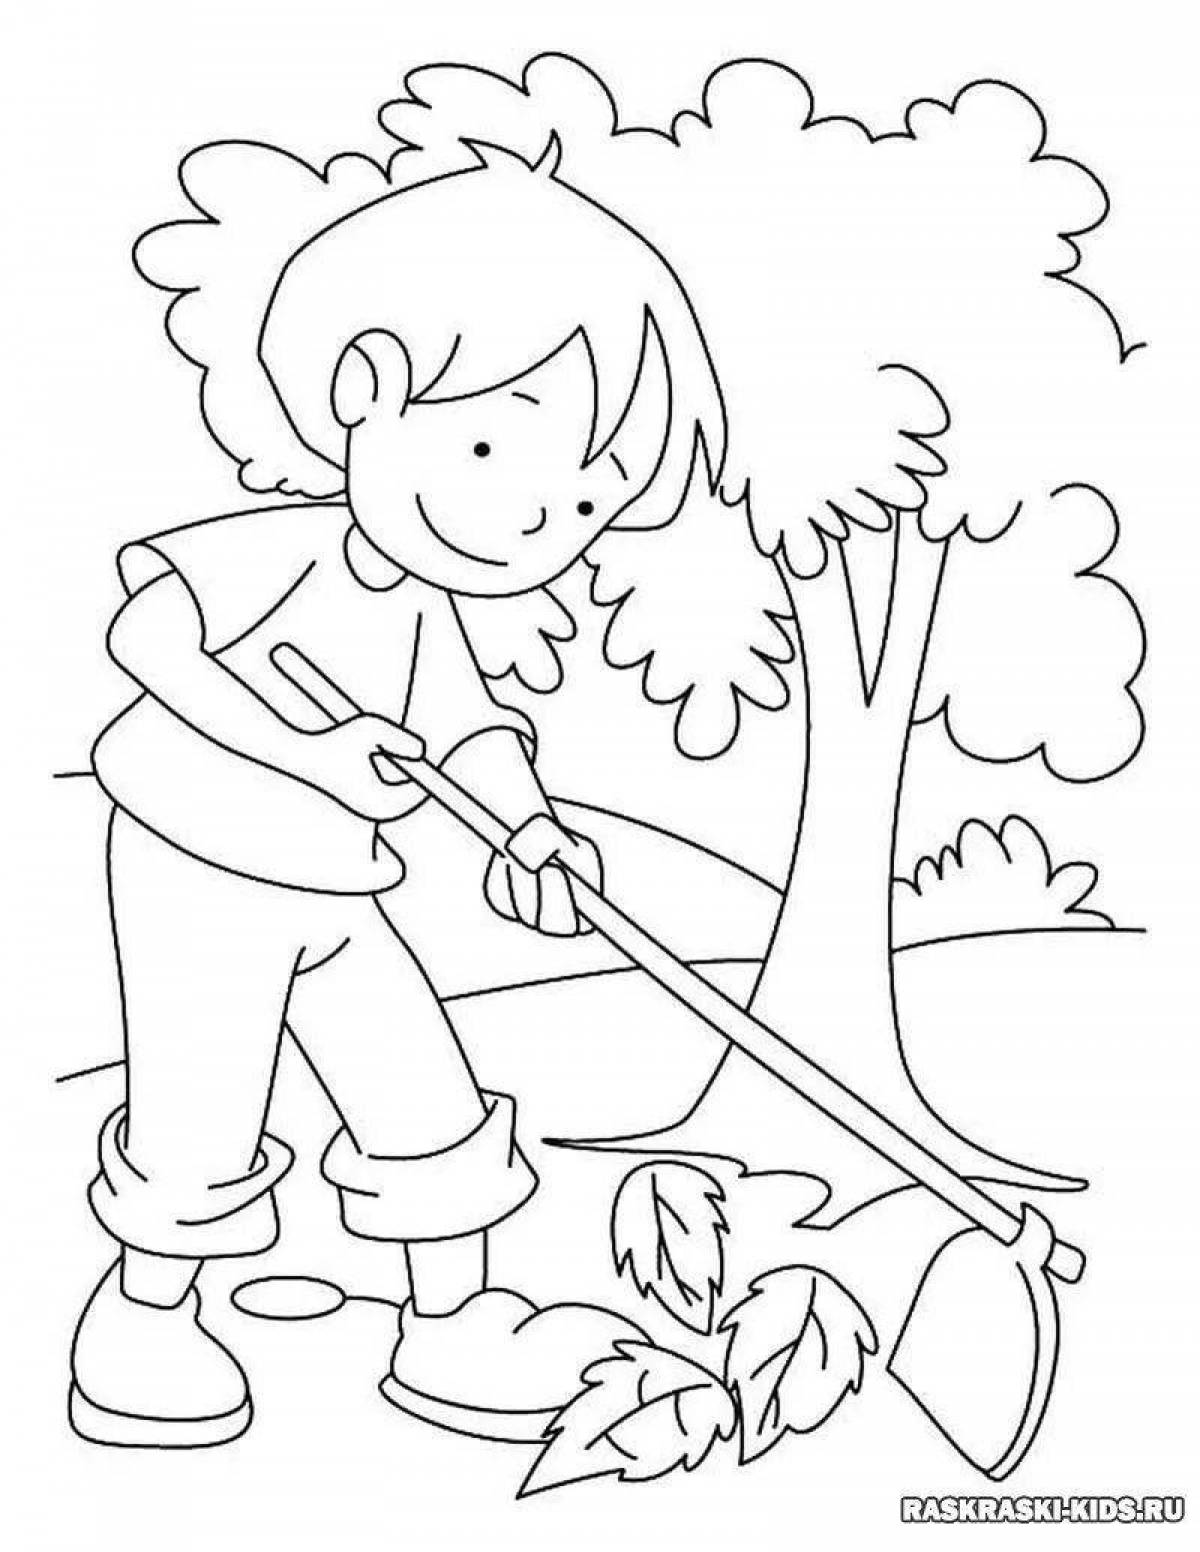 Coloring book excellent care for nature